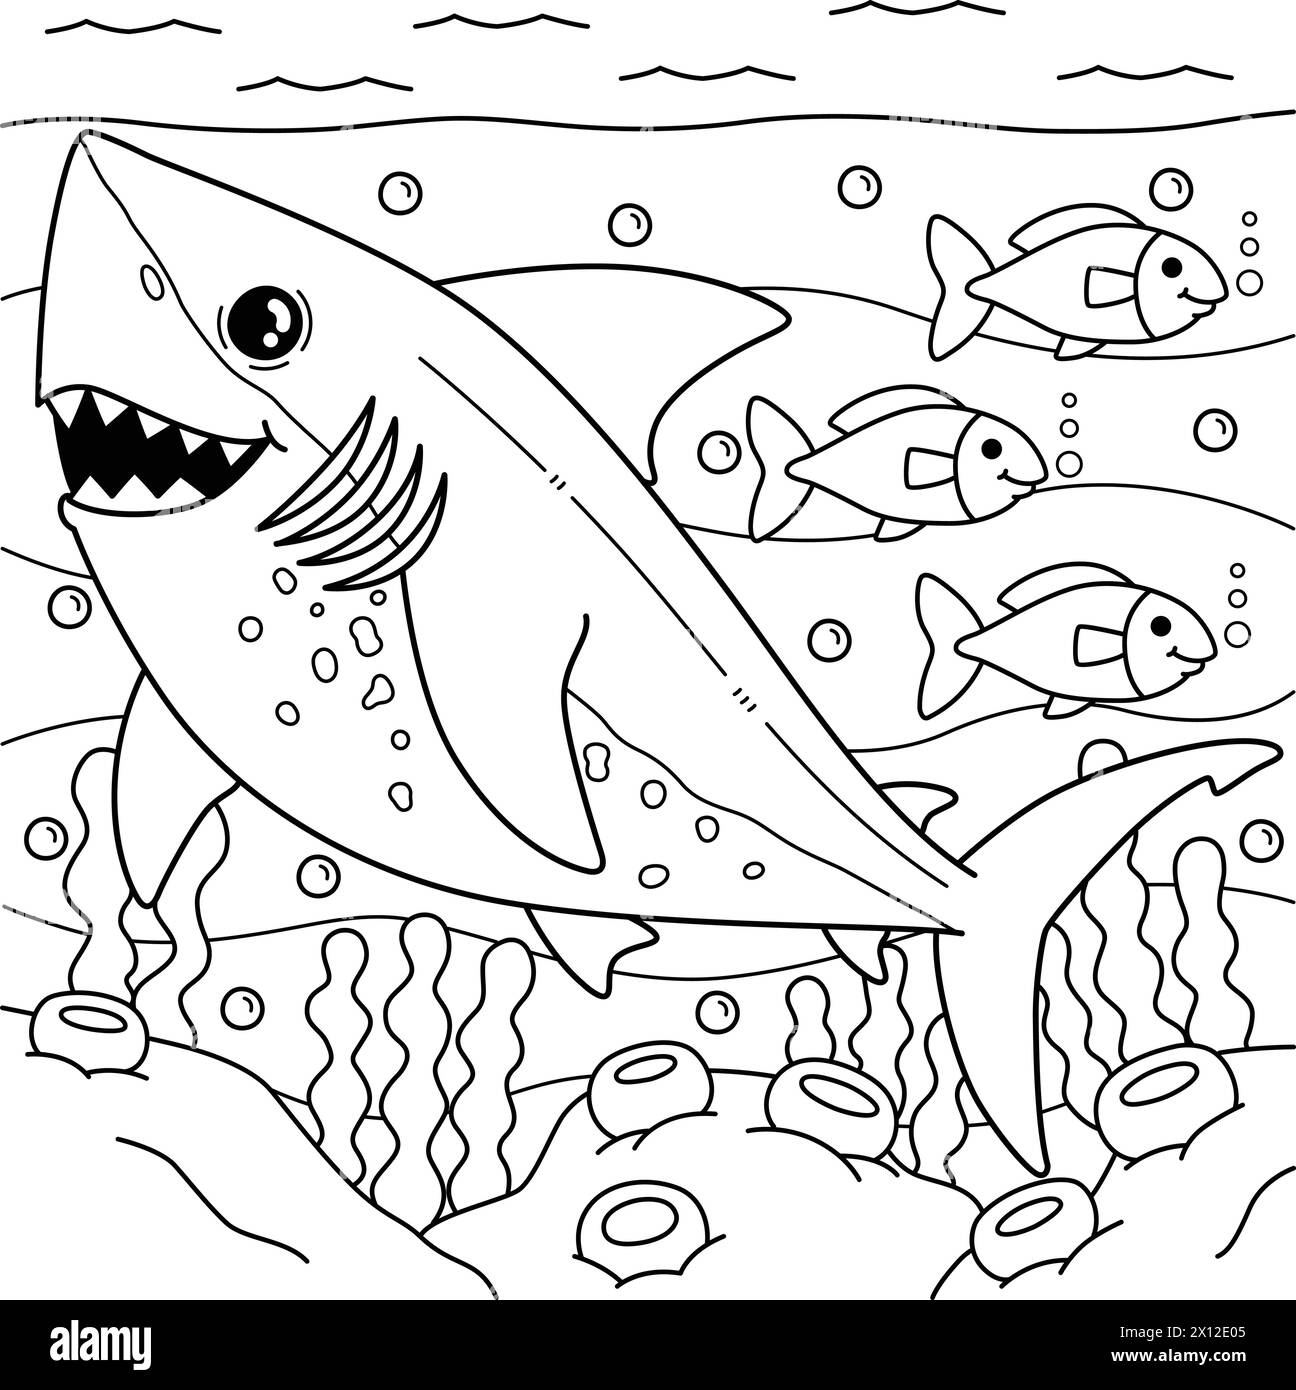 Salmon Shark Coloring Page for Kids Stock Vector